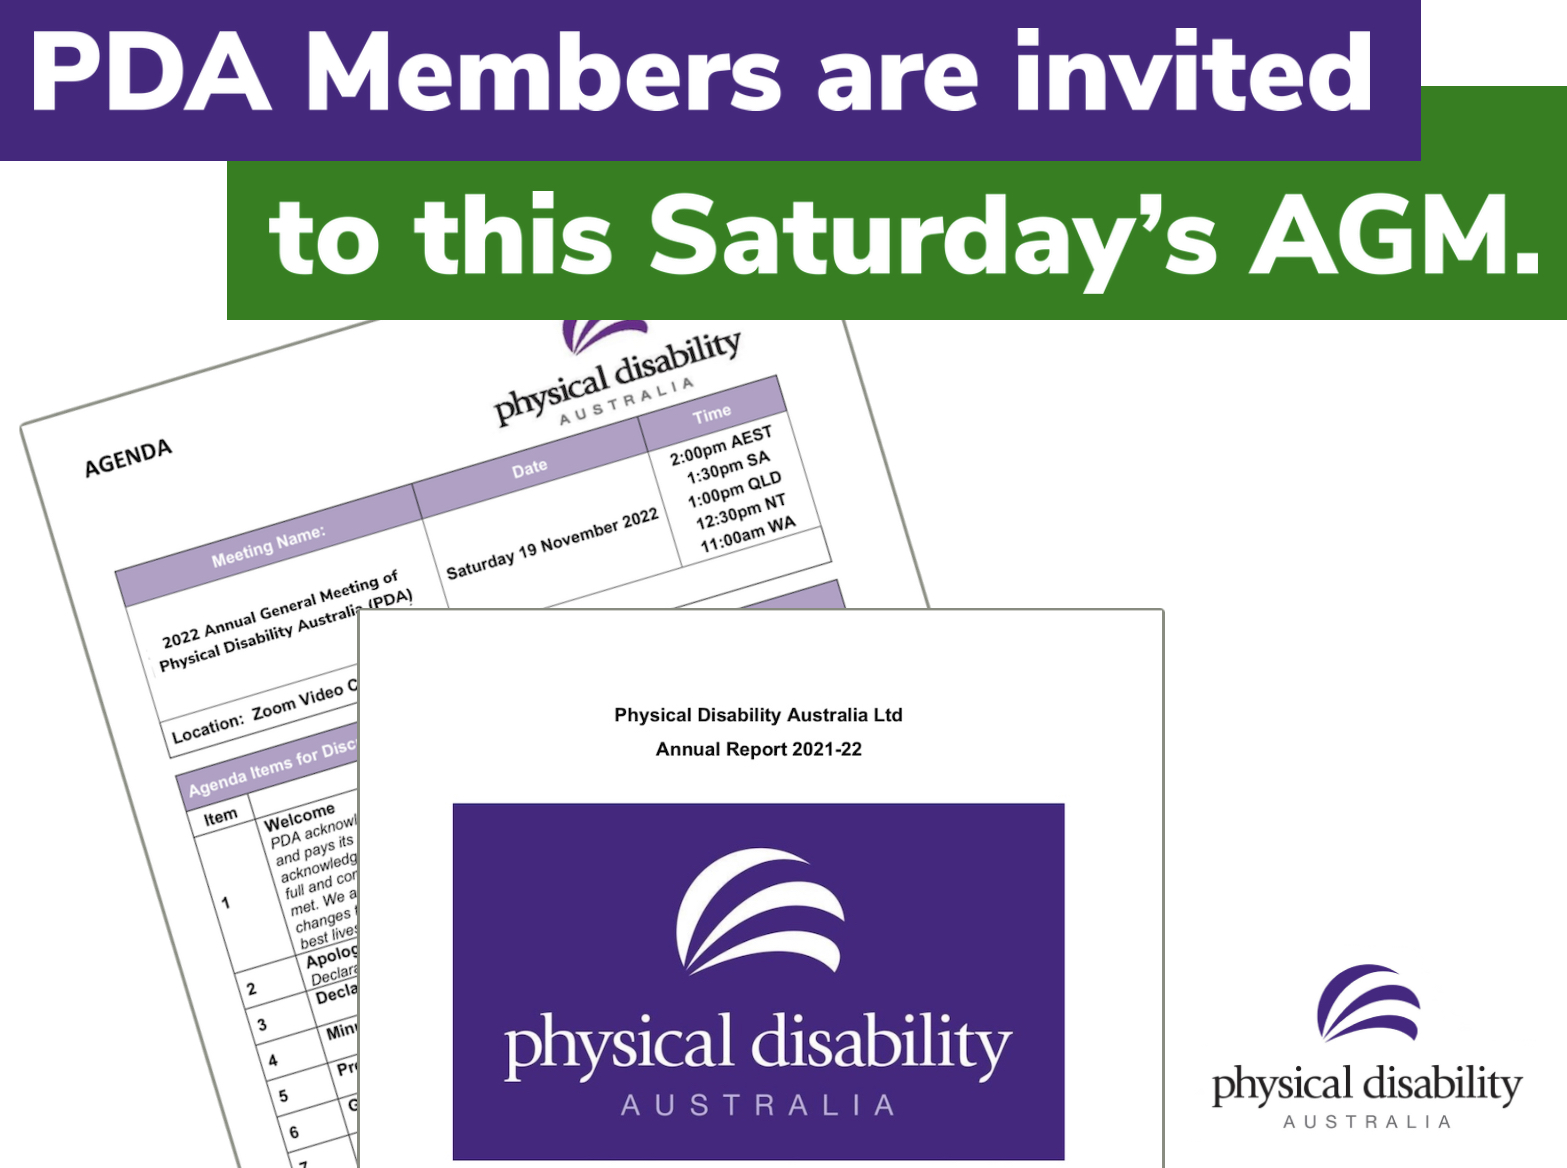 PDA Members are invited to our AGM this Saturday (19th November 2022) via Zoom.